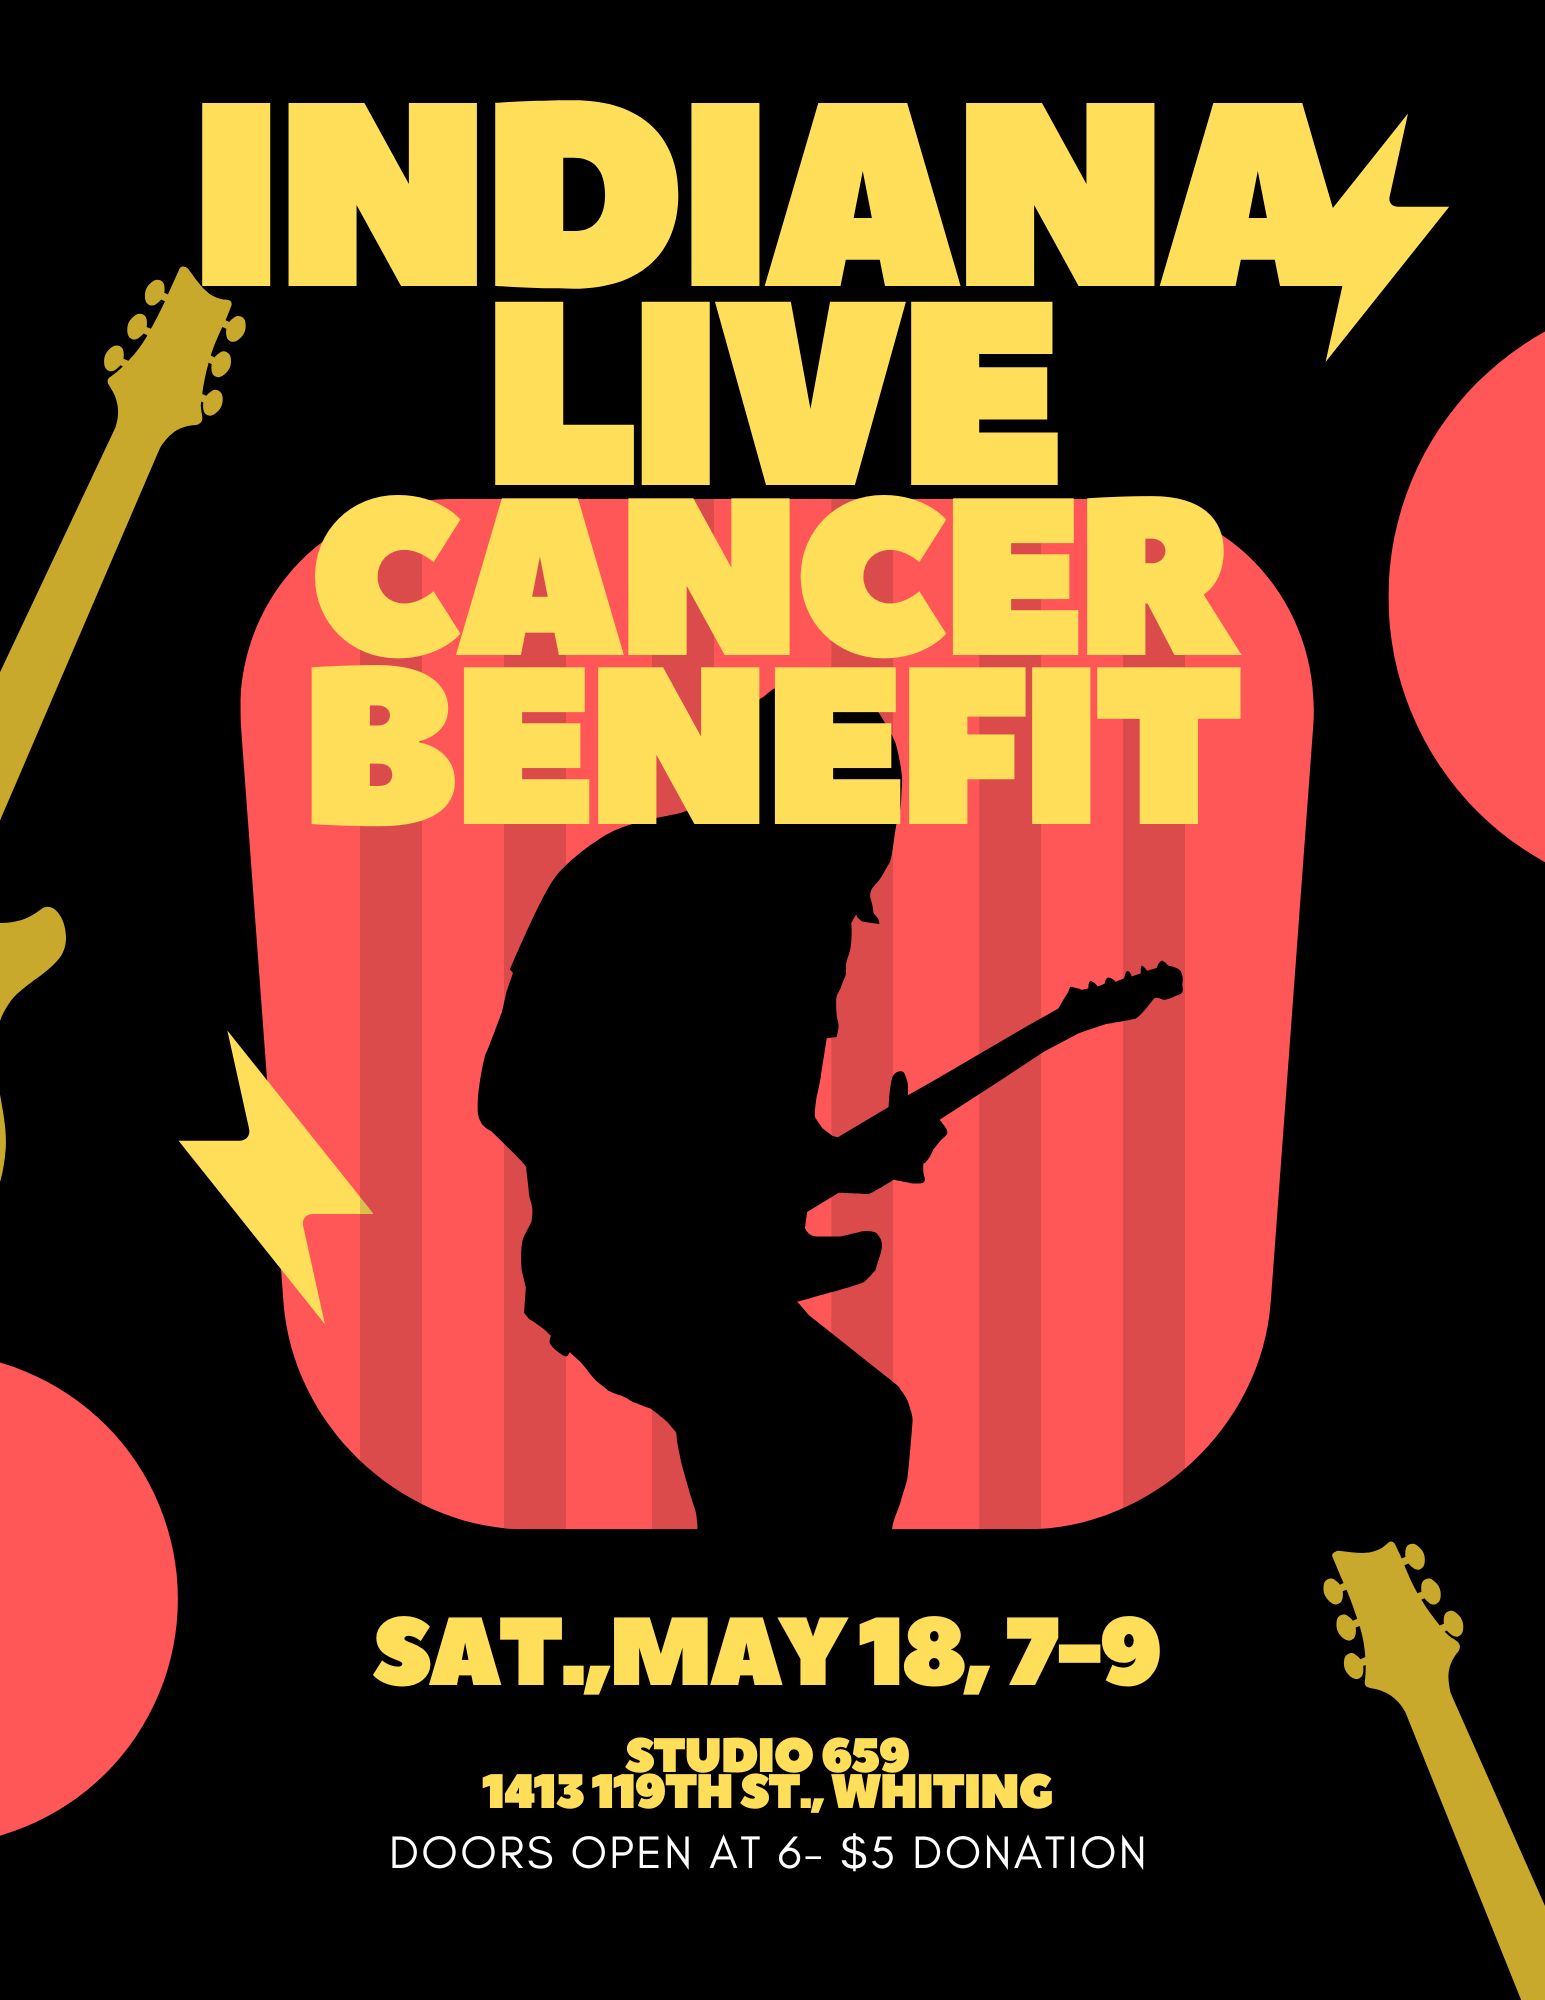 Indiana LIVE Cancer Benefit